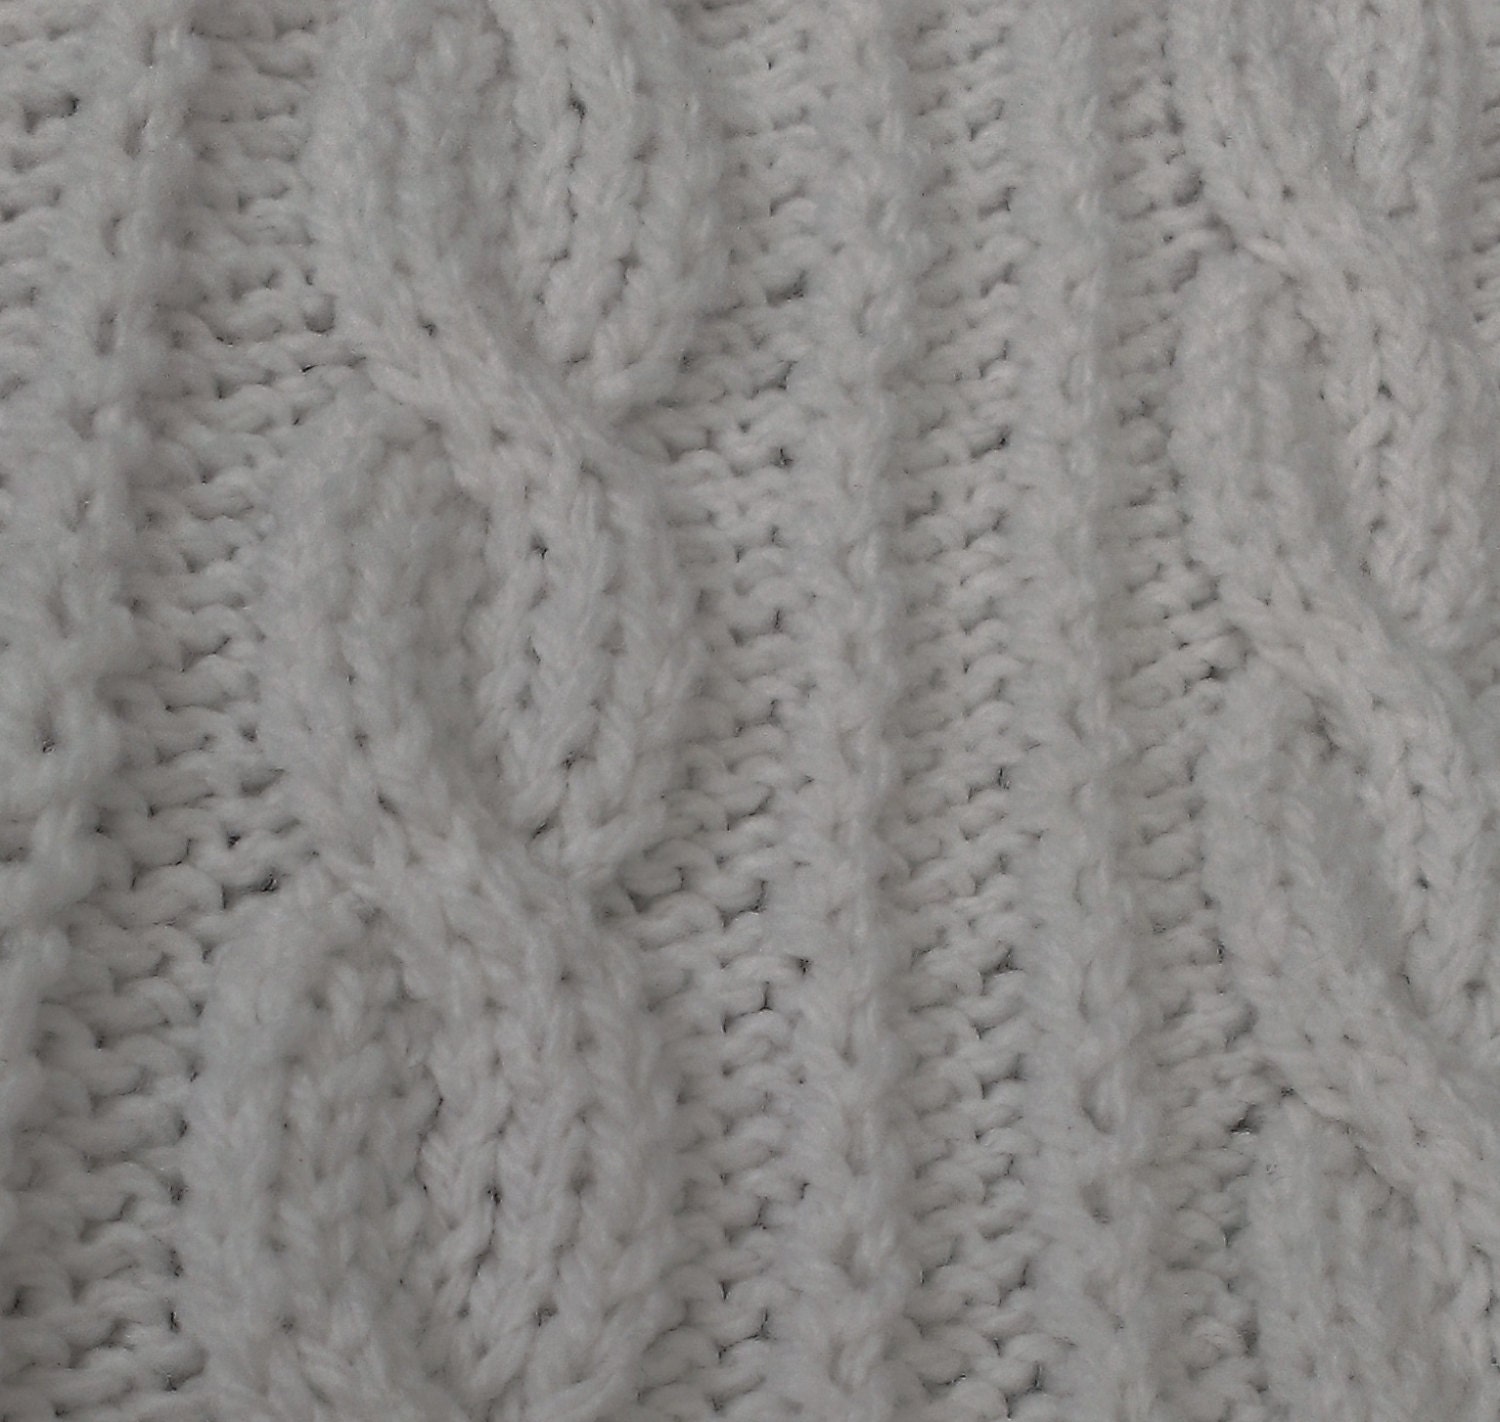 Knitting Pattern: Lovely Cabled Baby Blanket Knitting Pattern - Etsy